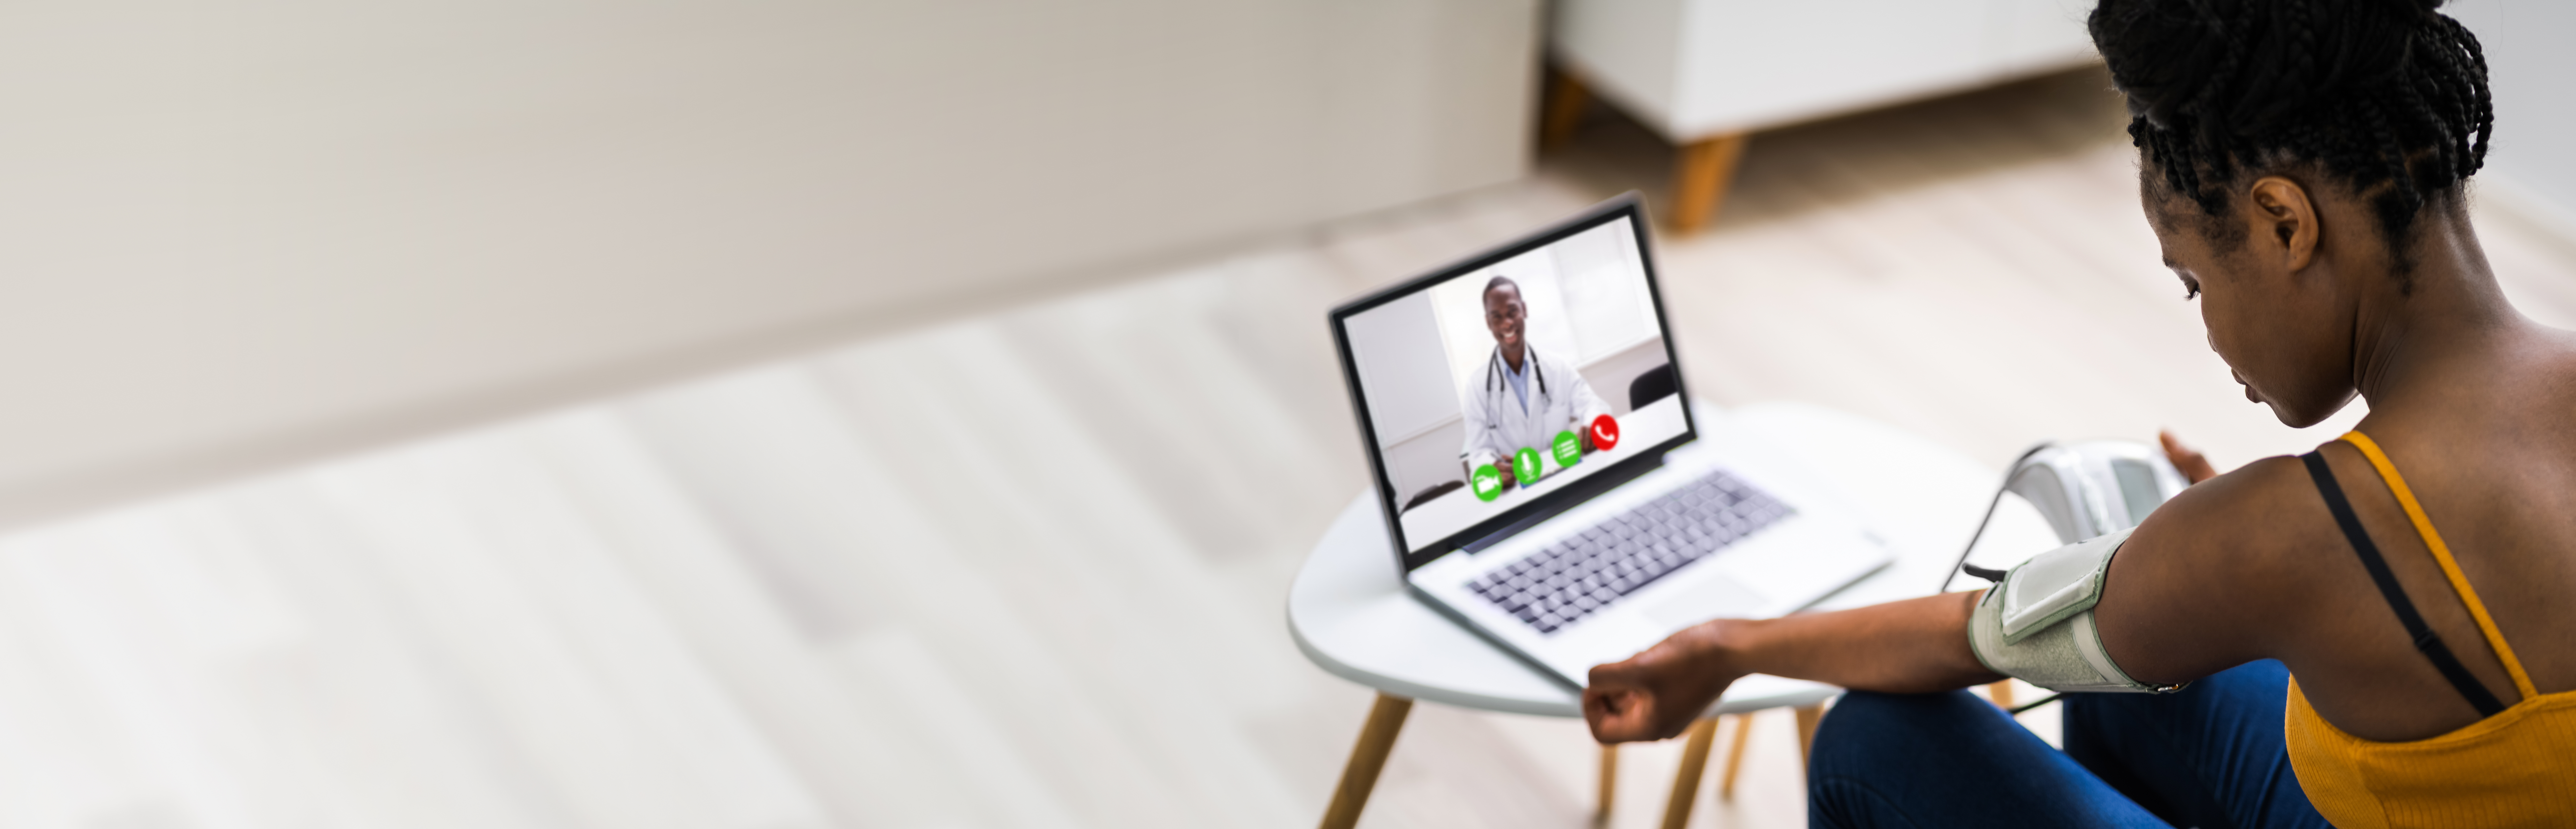 Telehealth: Taking Advantage of a Growth Vehicle Here to Stay